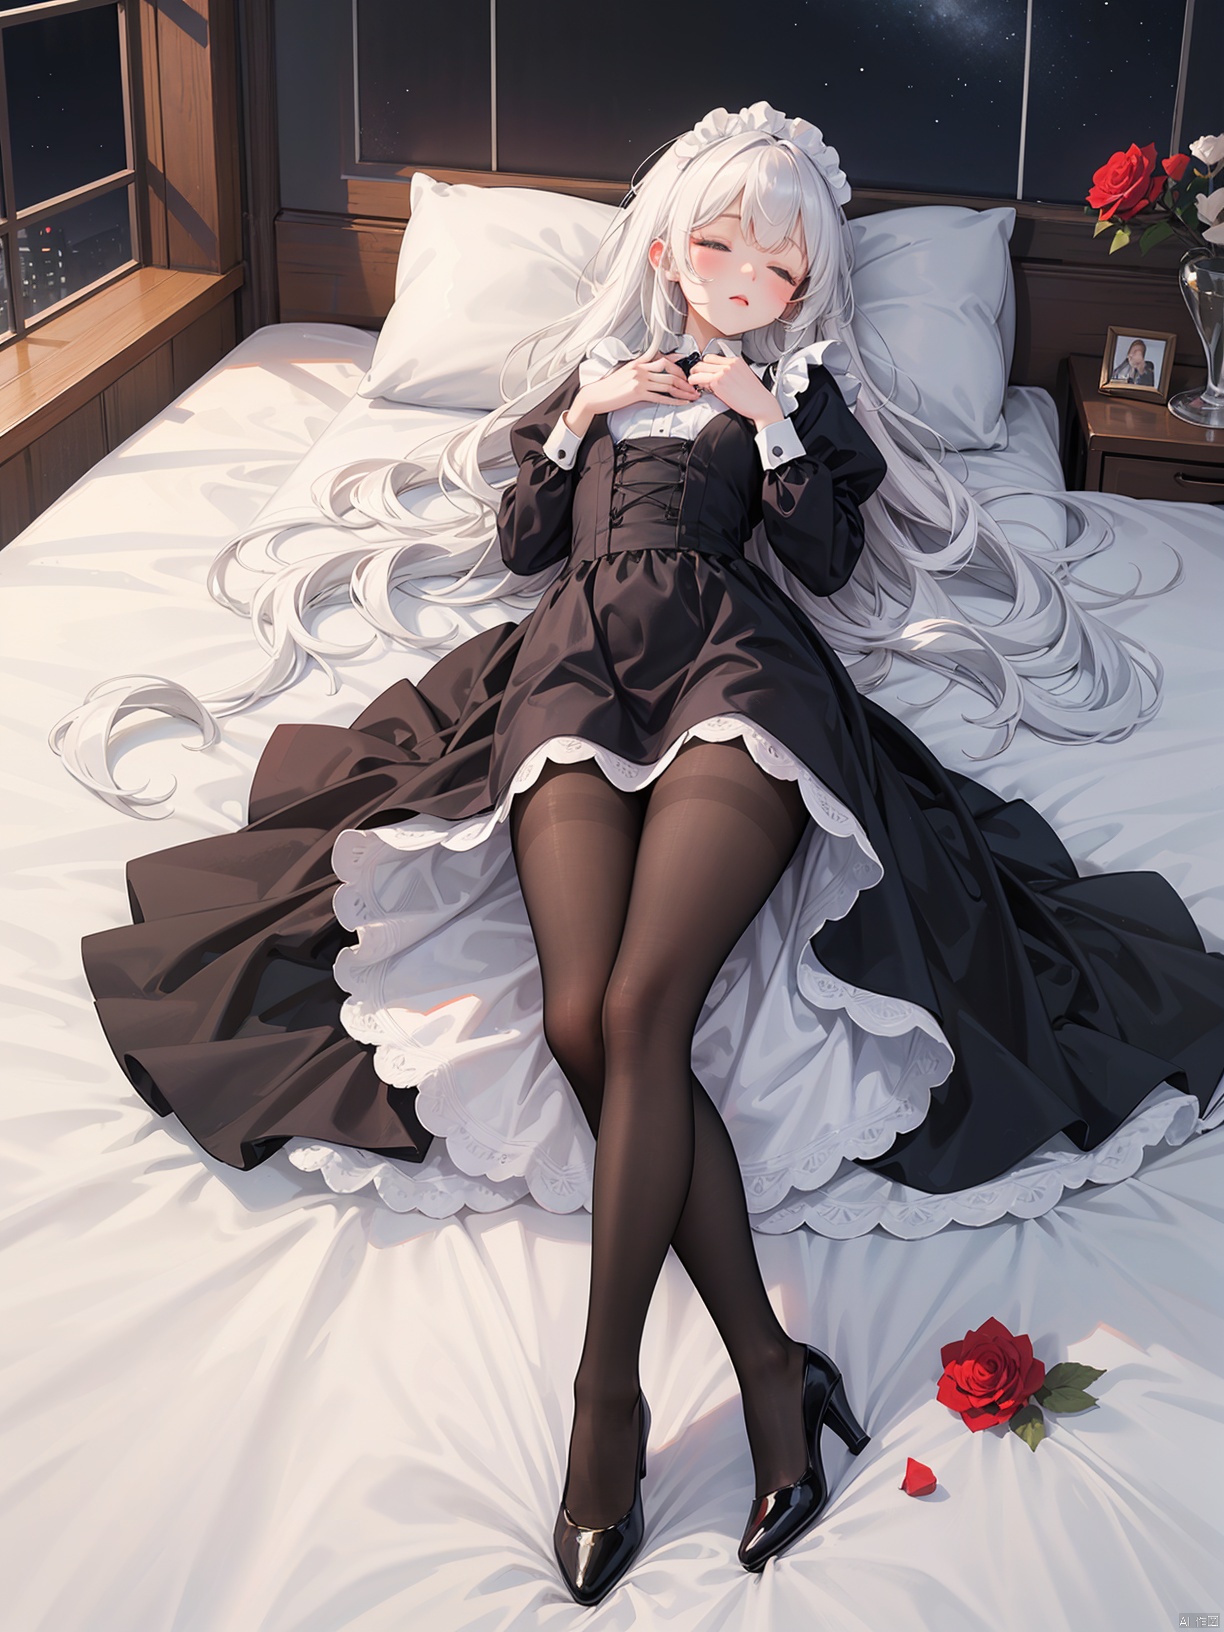 Wearing maid attire, with fluffy and dense long hair, big wavy curls, white haired beauty, white long hair, slender legs, sleeping, sleeping peacefully, mature charm, fingers holding the bed sheet, blue eyes, high heels, tall figure, full and round thighs, surrounded by roses, lying in a strange space, red roses, black pantyhose, heavy on the bed